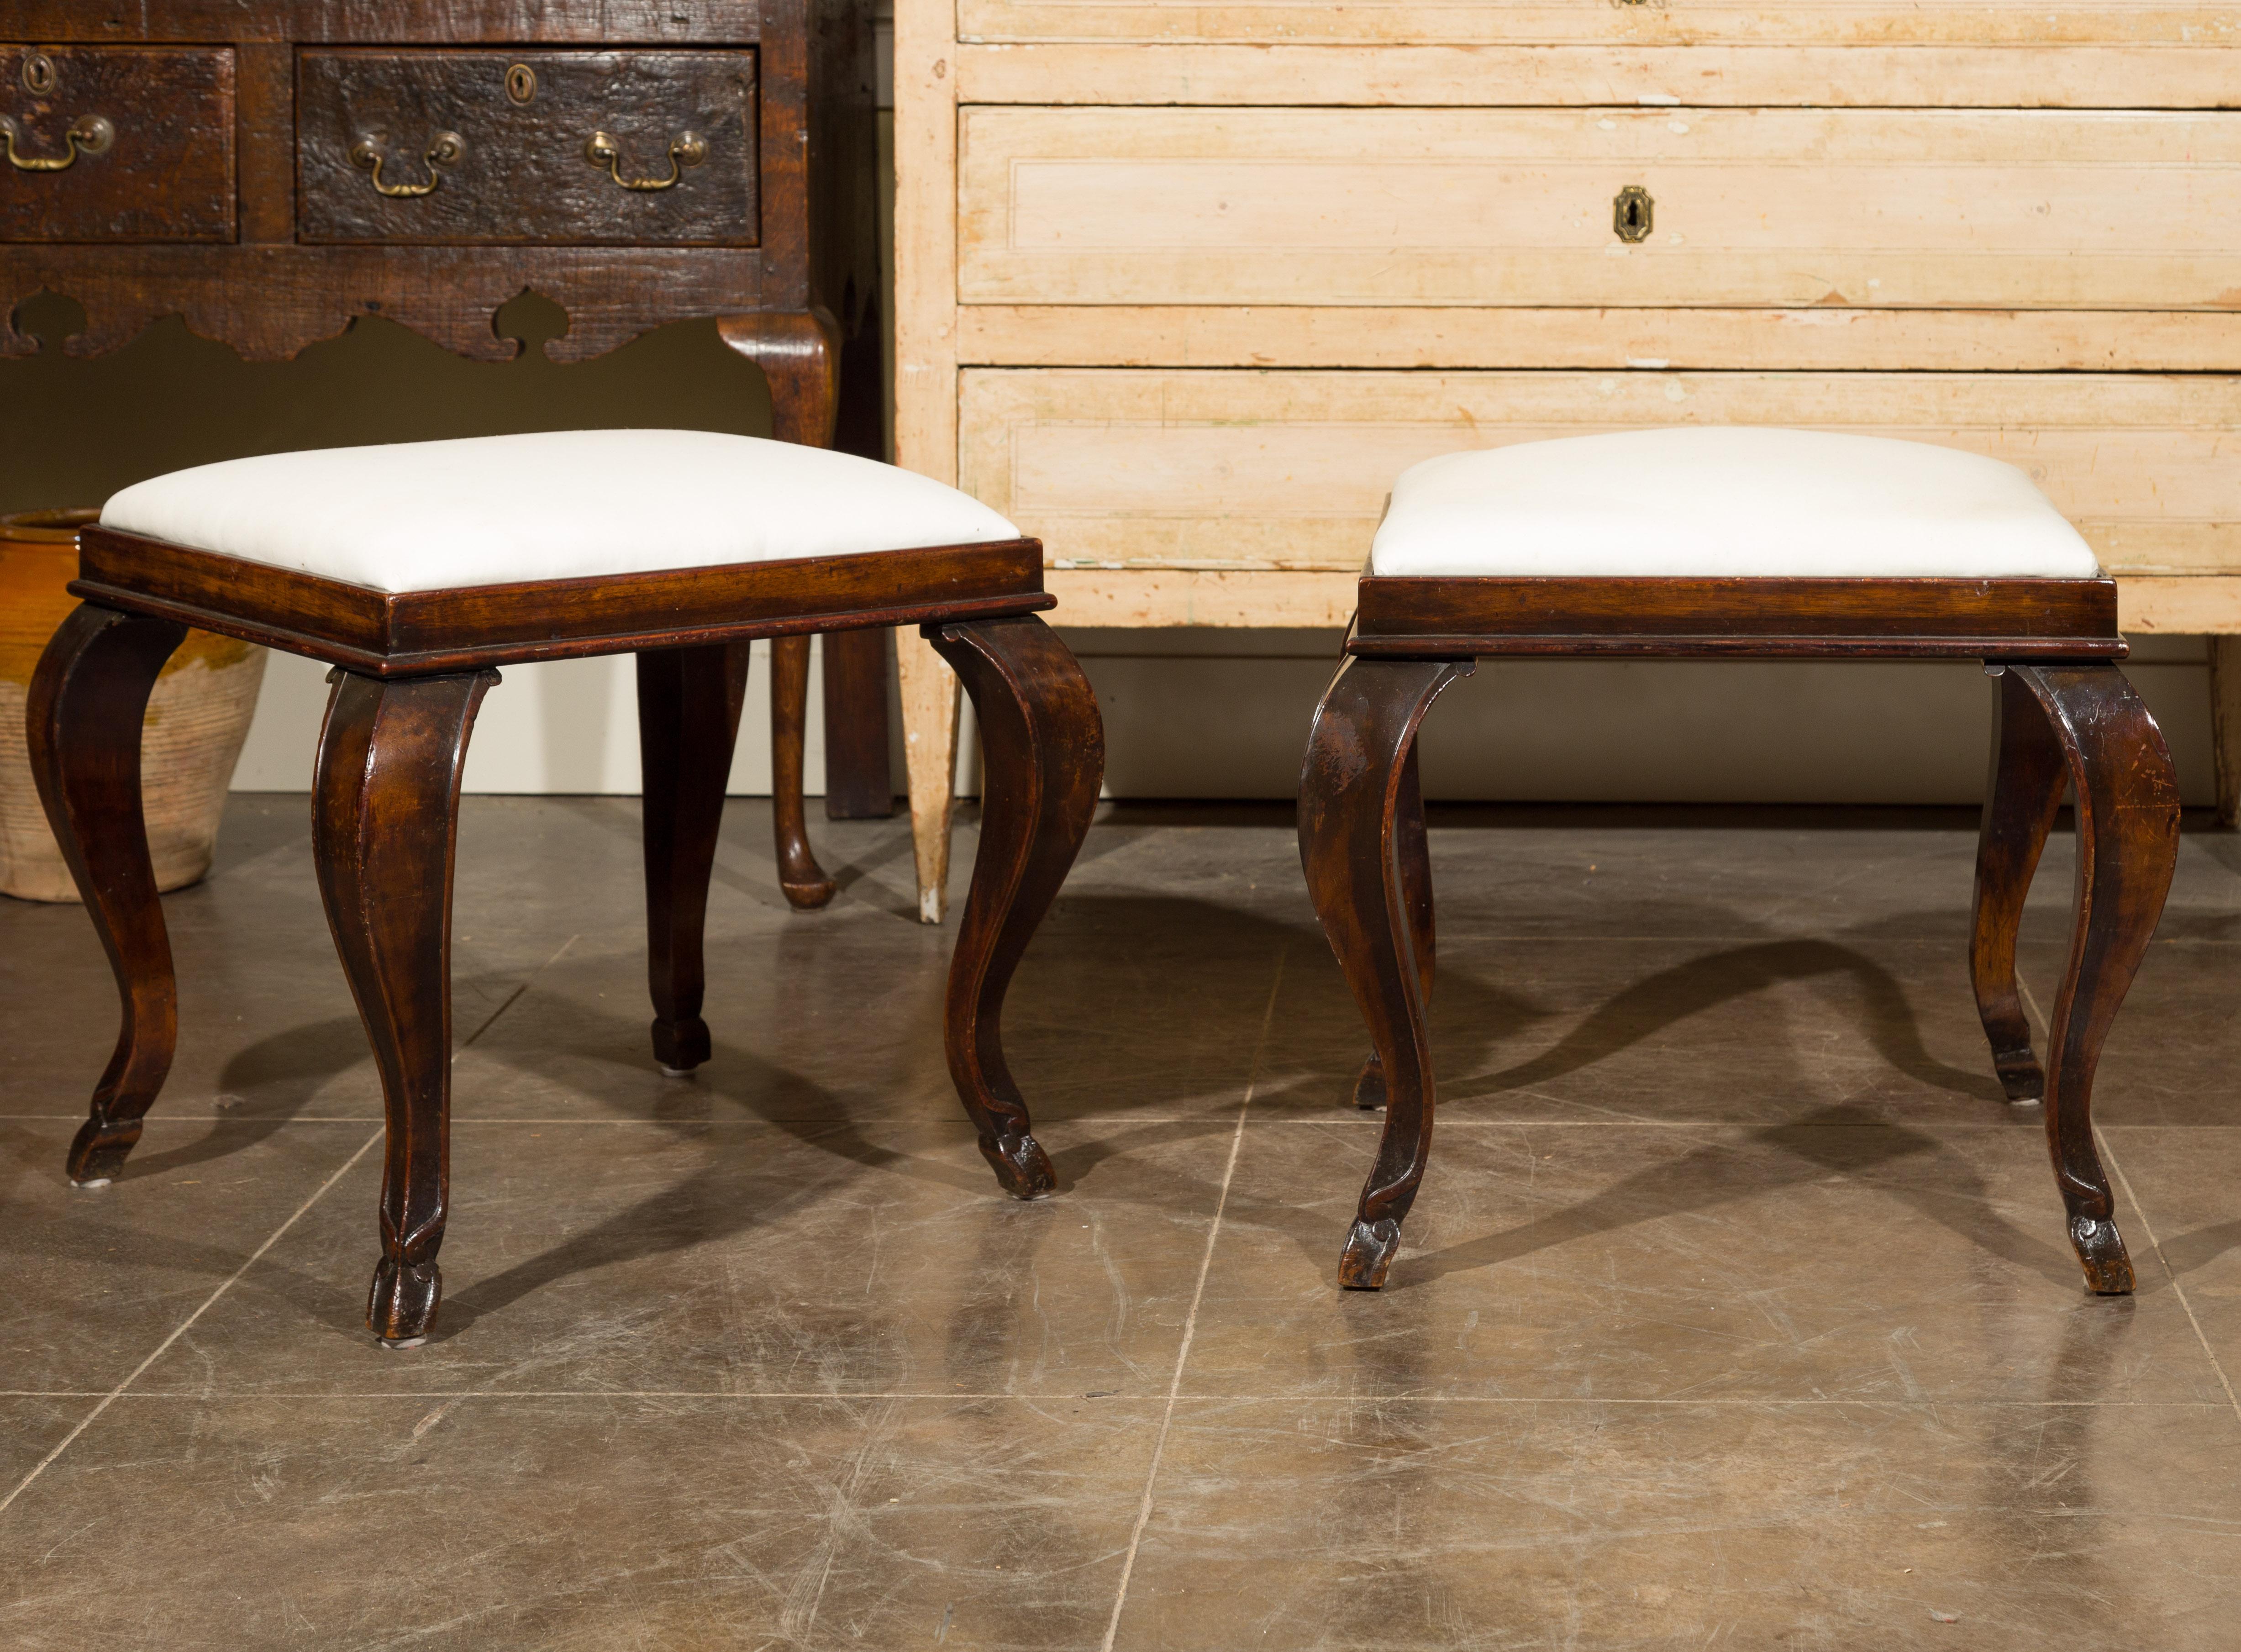 A pair of French Louis XV style wooden stools from the late 19th century, with cabriole legs and new muslin upholstery. Born in France at the end of Emperor Napoleon III's reign, each of this pair of wooden stools presents the stylistic